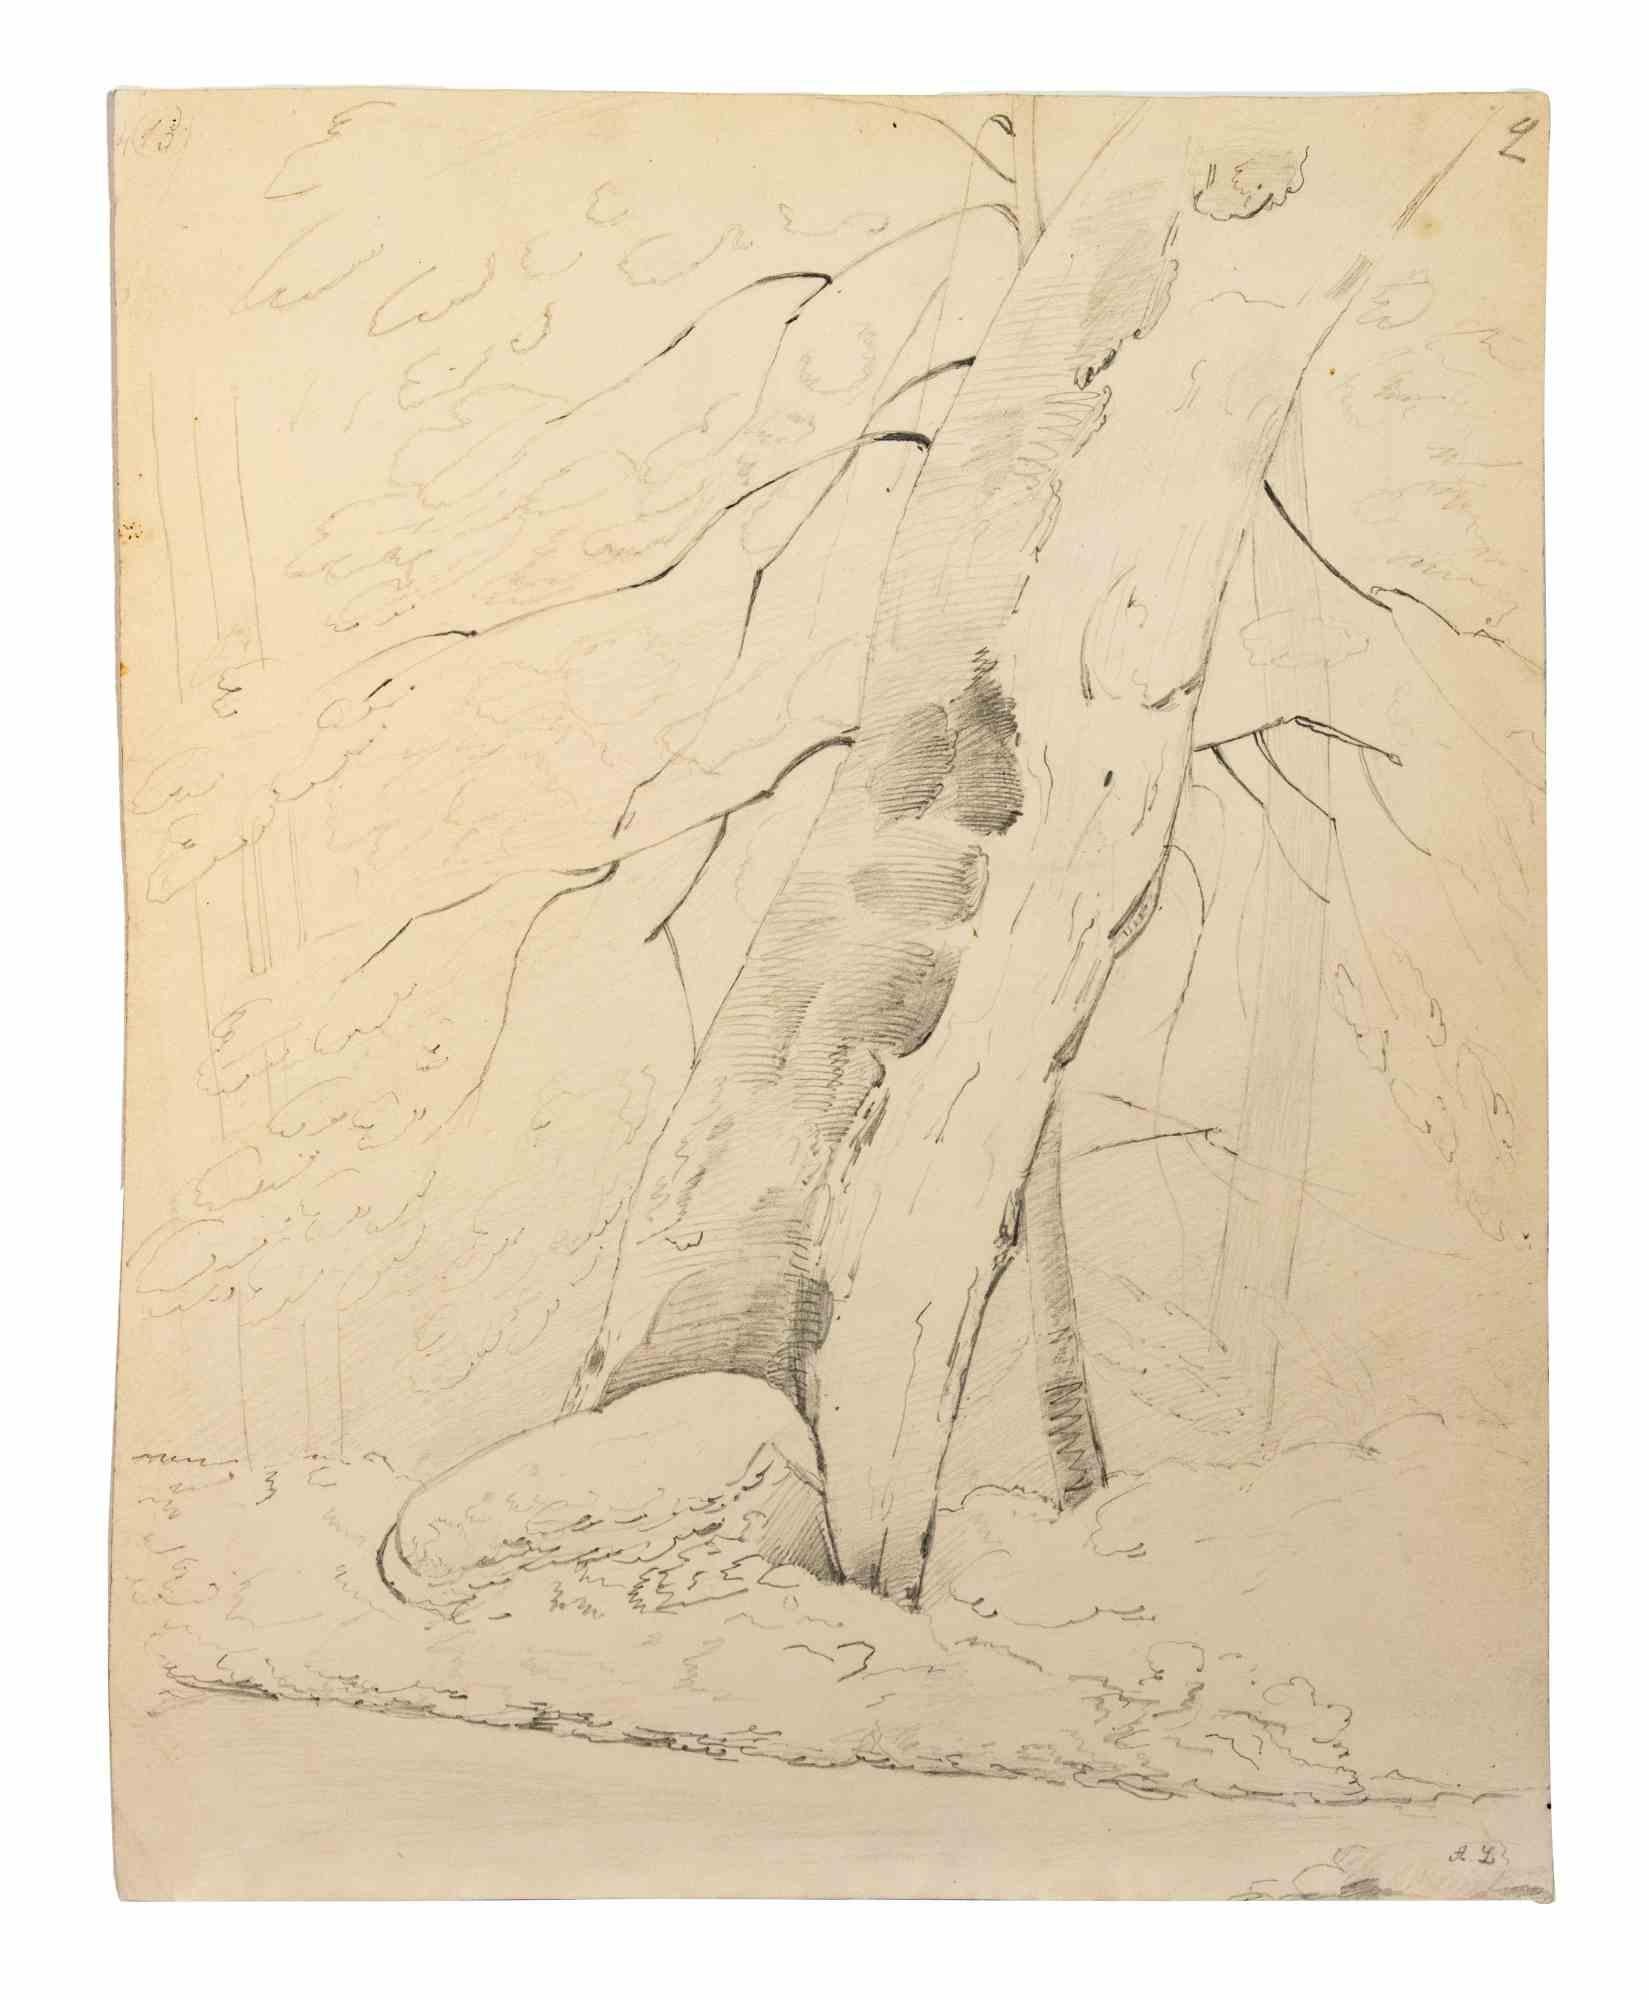 Tree of Life is a Pencil Drawing realized by Alphonse Legros (1837-1911).

Good condition on a yellowed paper.

Monogrammed by the author in the lower right corner of the artwork.

Alphonse Legros (Dijon, 1837 - Watford, 1911) was a French-British